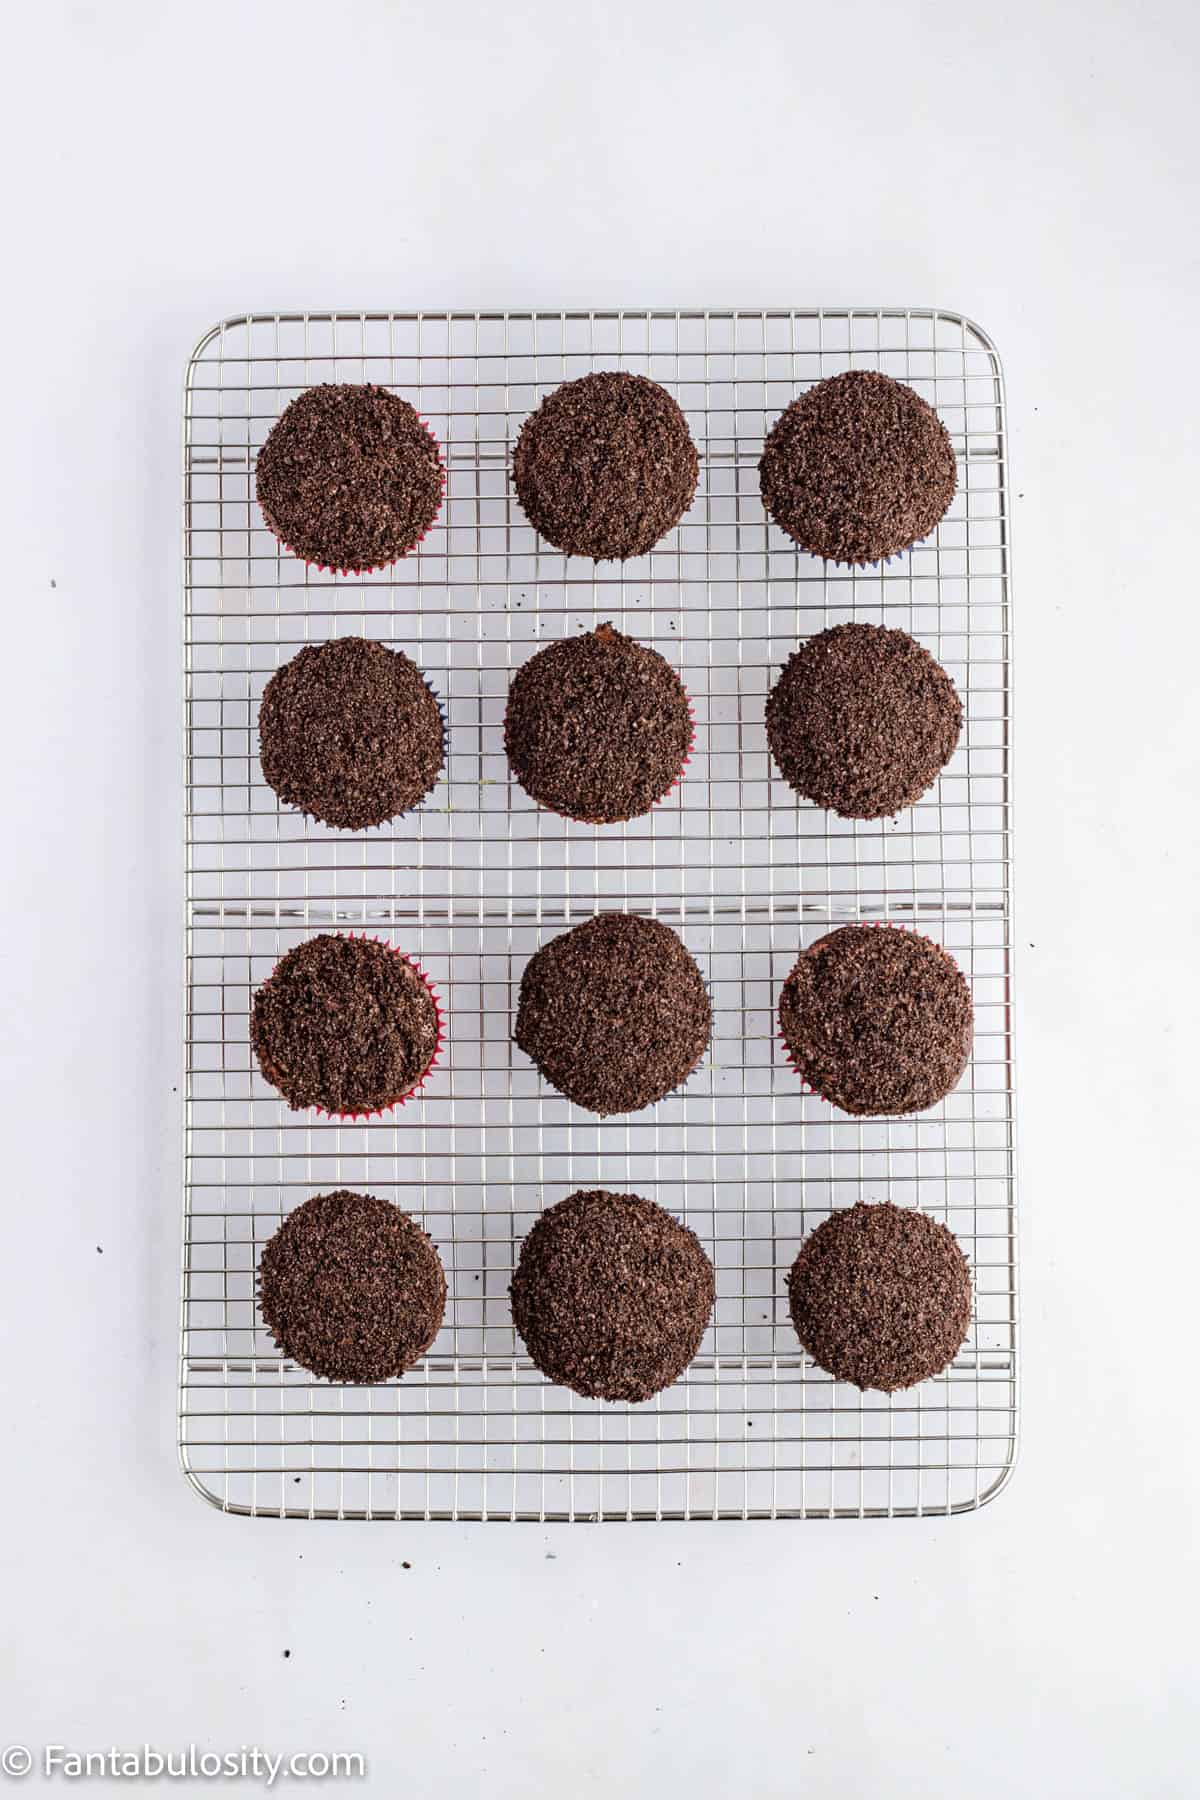 12 chocolate cupcakes with chocolate frosting and Oreo crumbs are displayed on a wire cooling rack